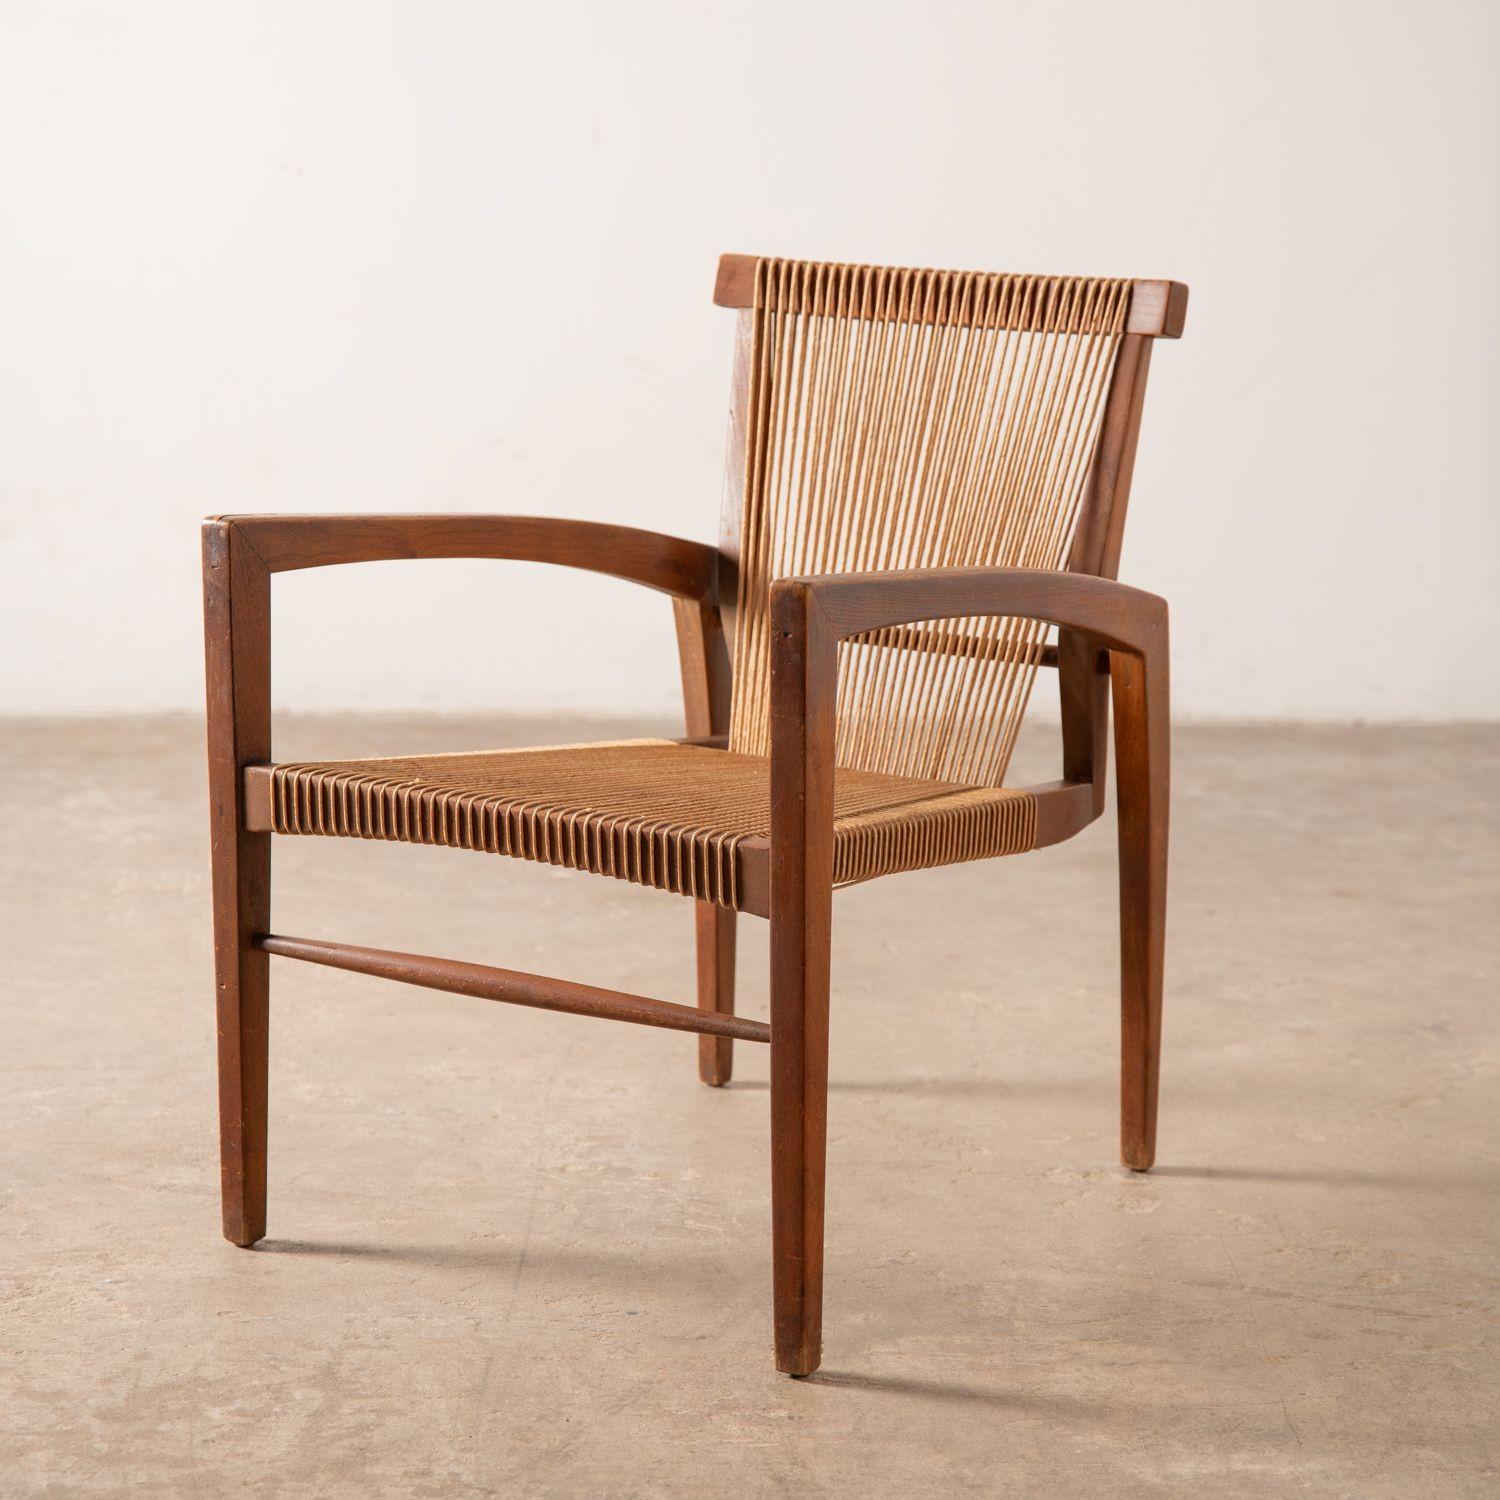 Walnut Sculptural String Chair Crafted in the Irving Sabo Studio for JGFurniture In Good Condition For Sale In Dallas, TX